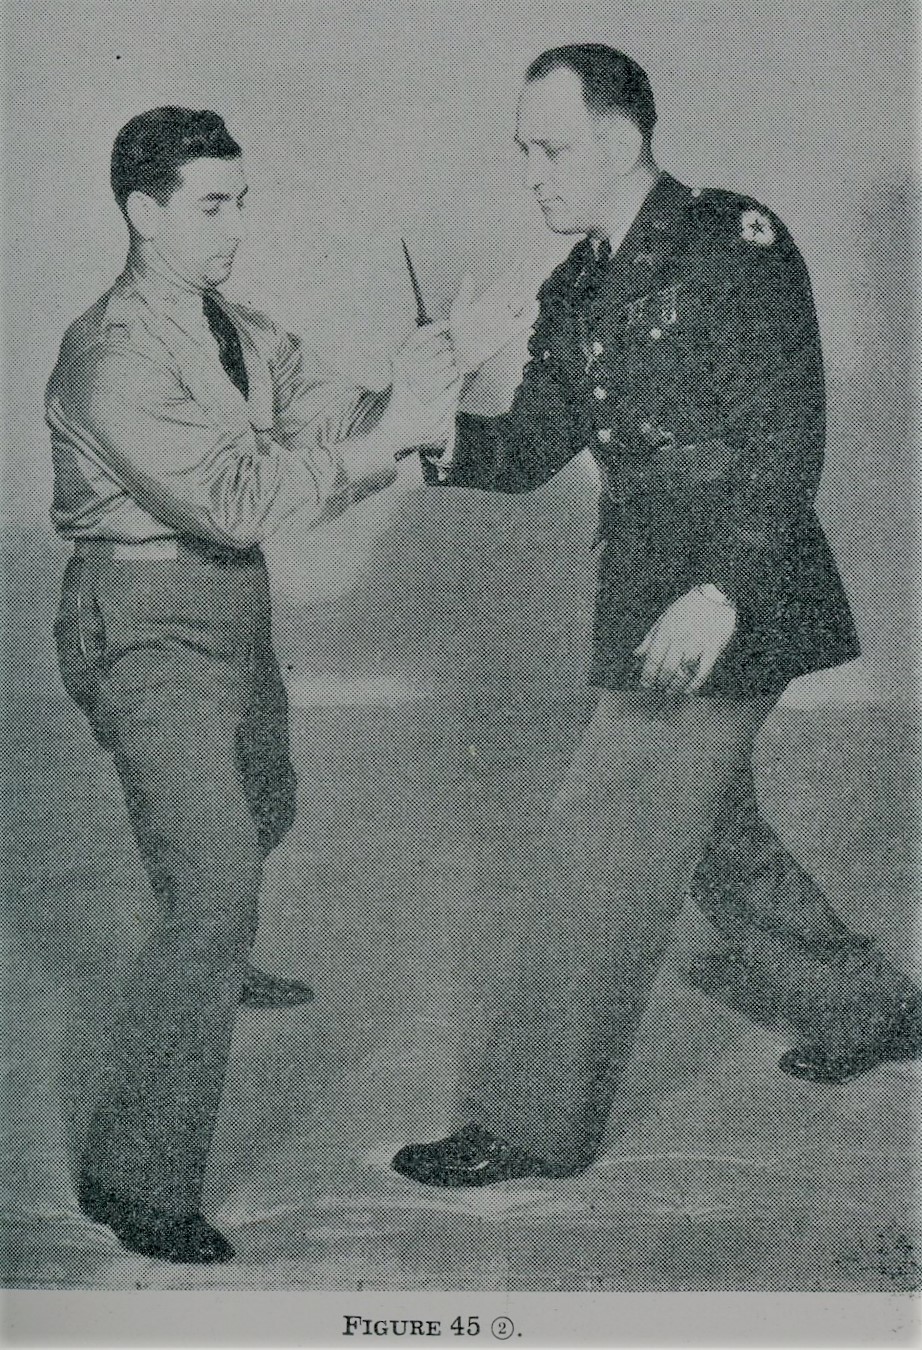 Grabbing opponent's knife from his hands during self defense.